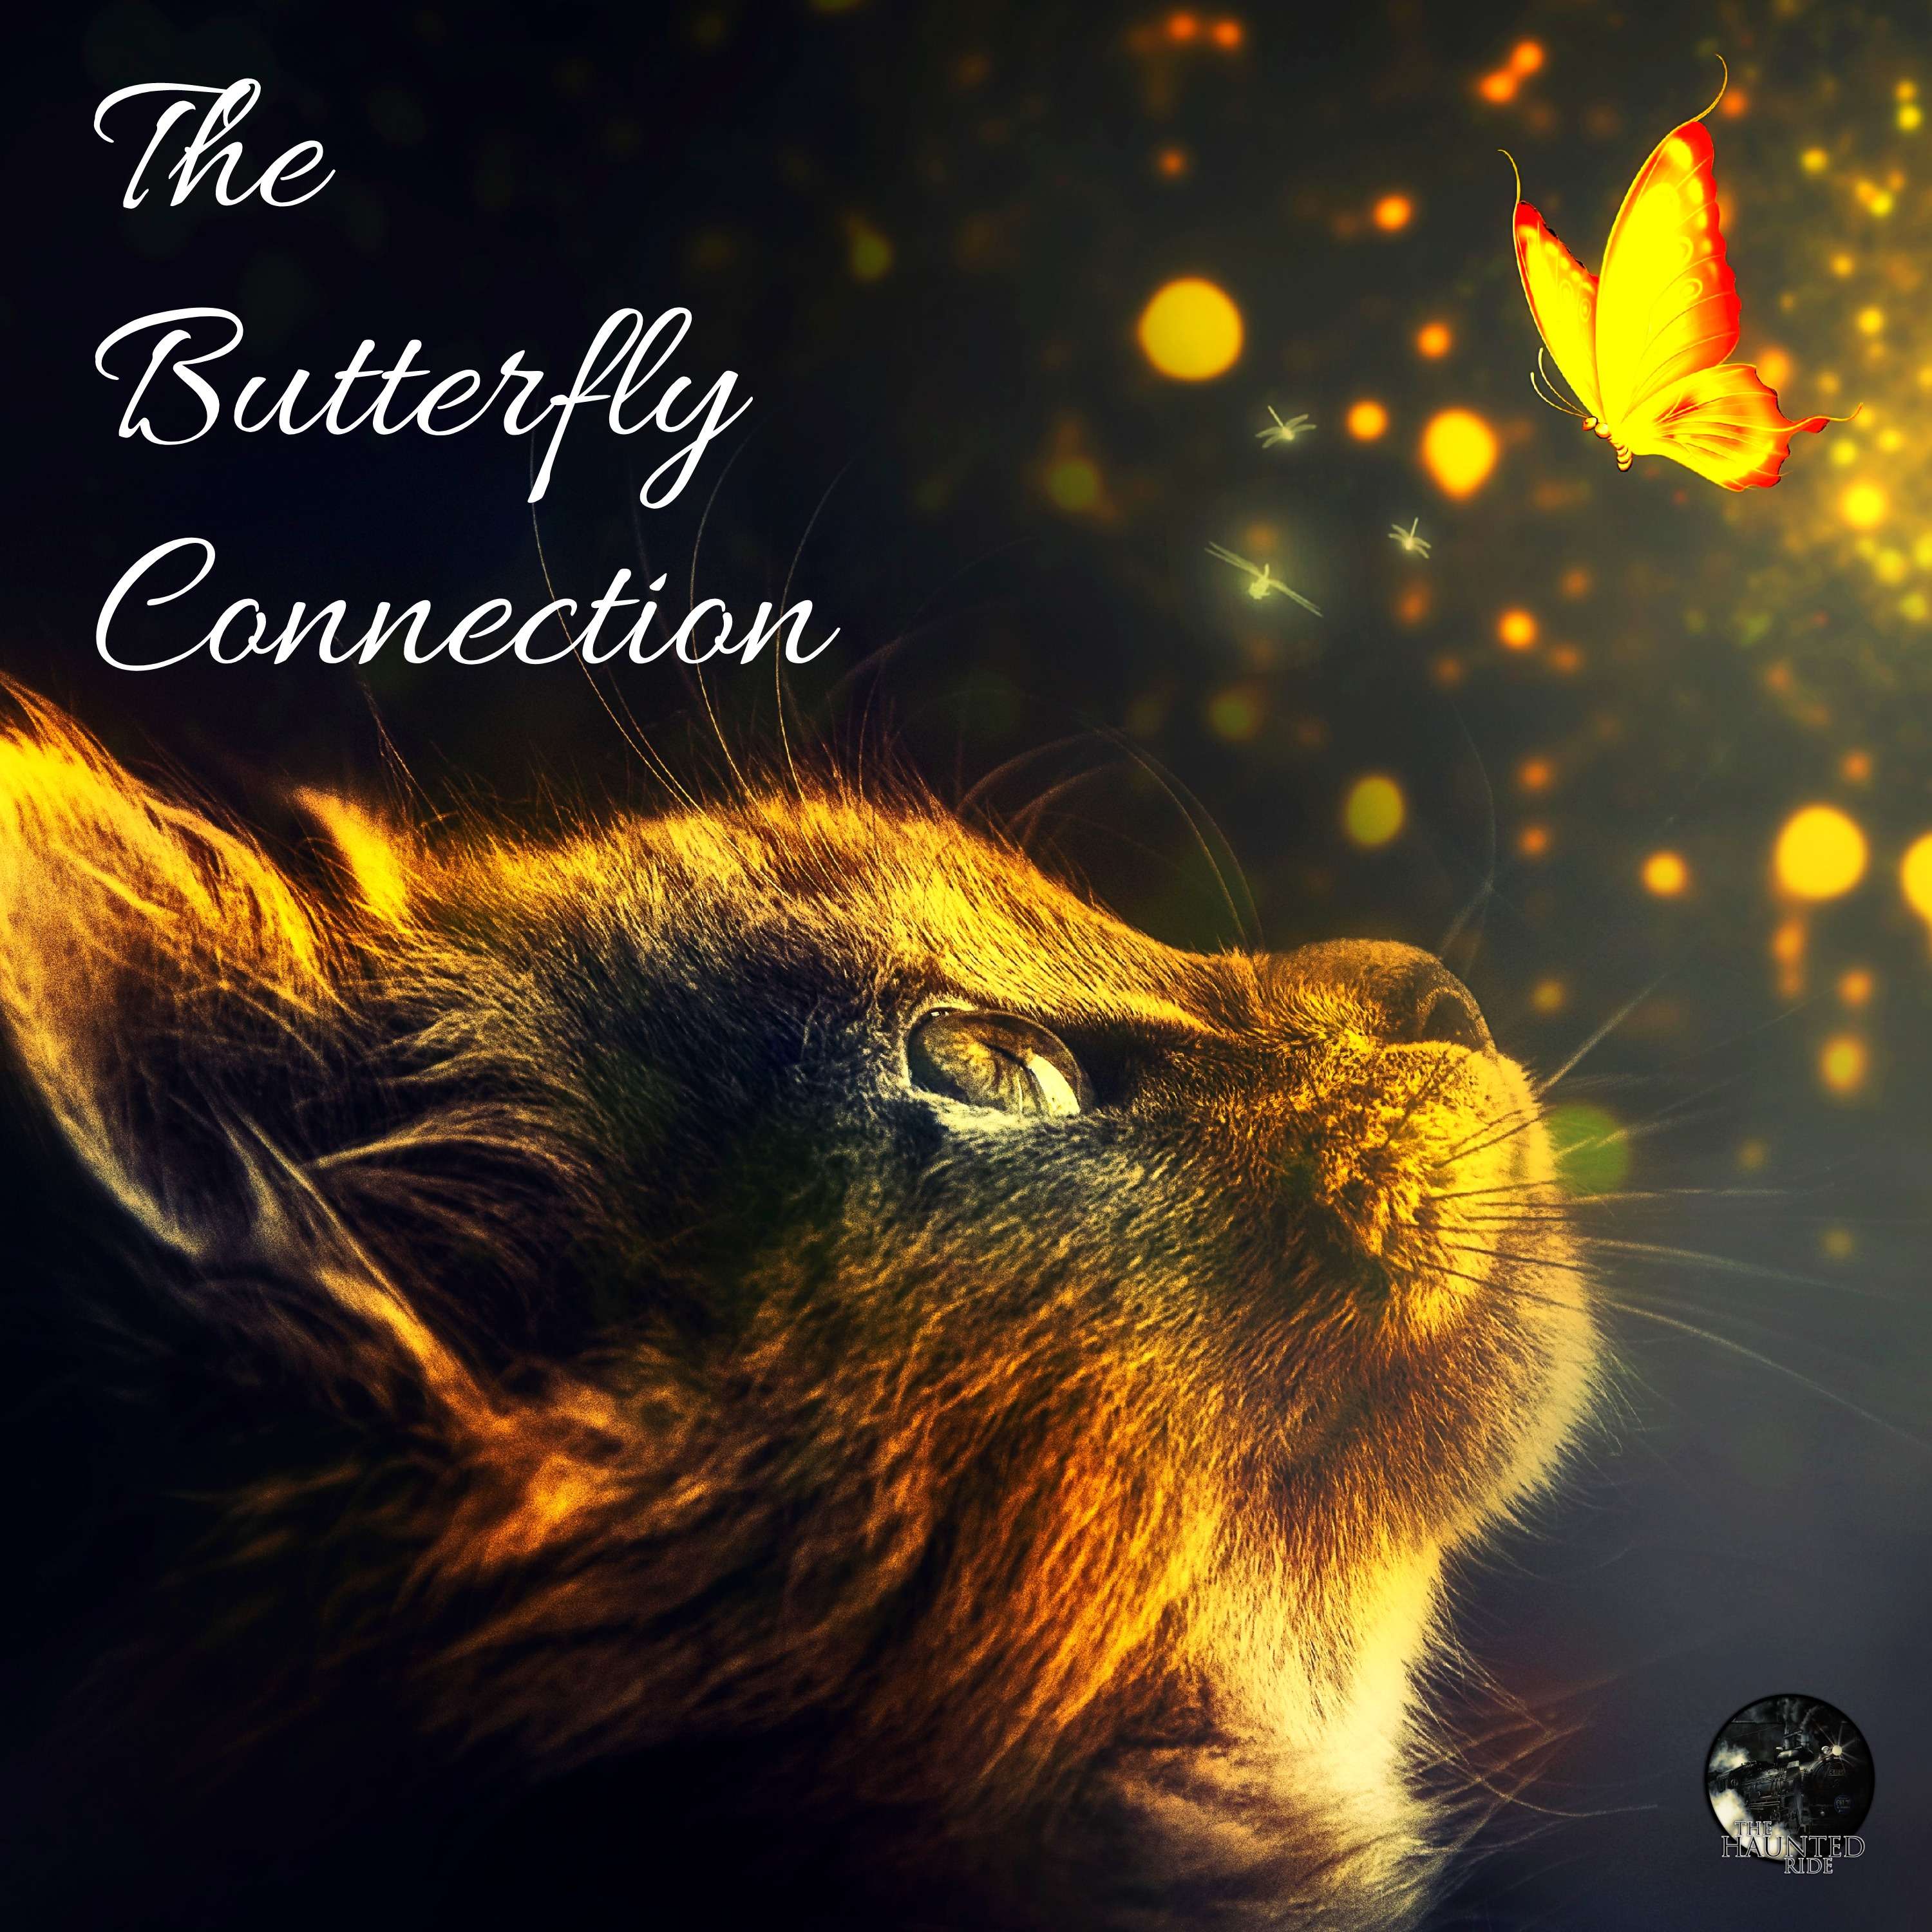 34: The Butterfly Connection